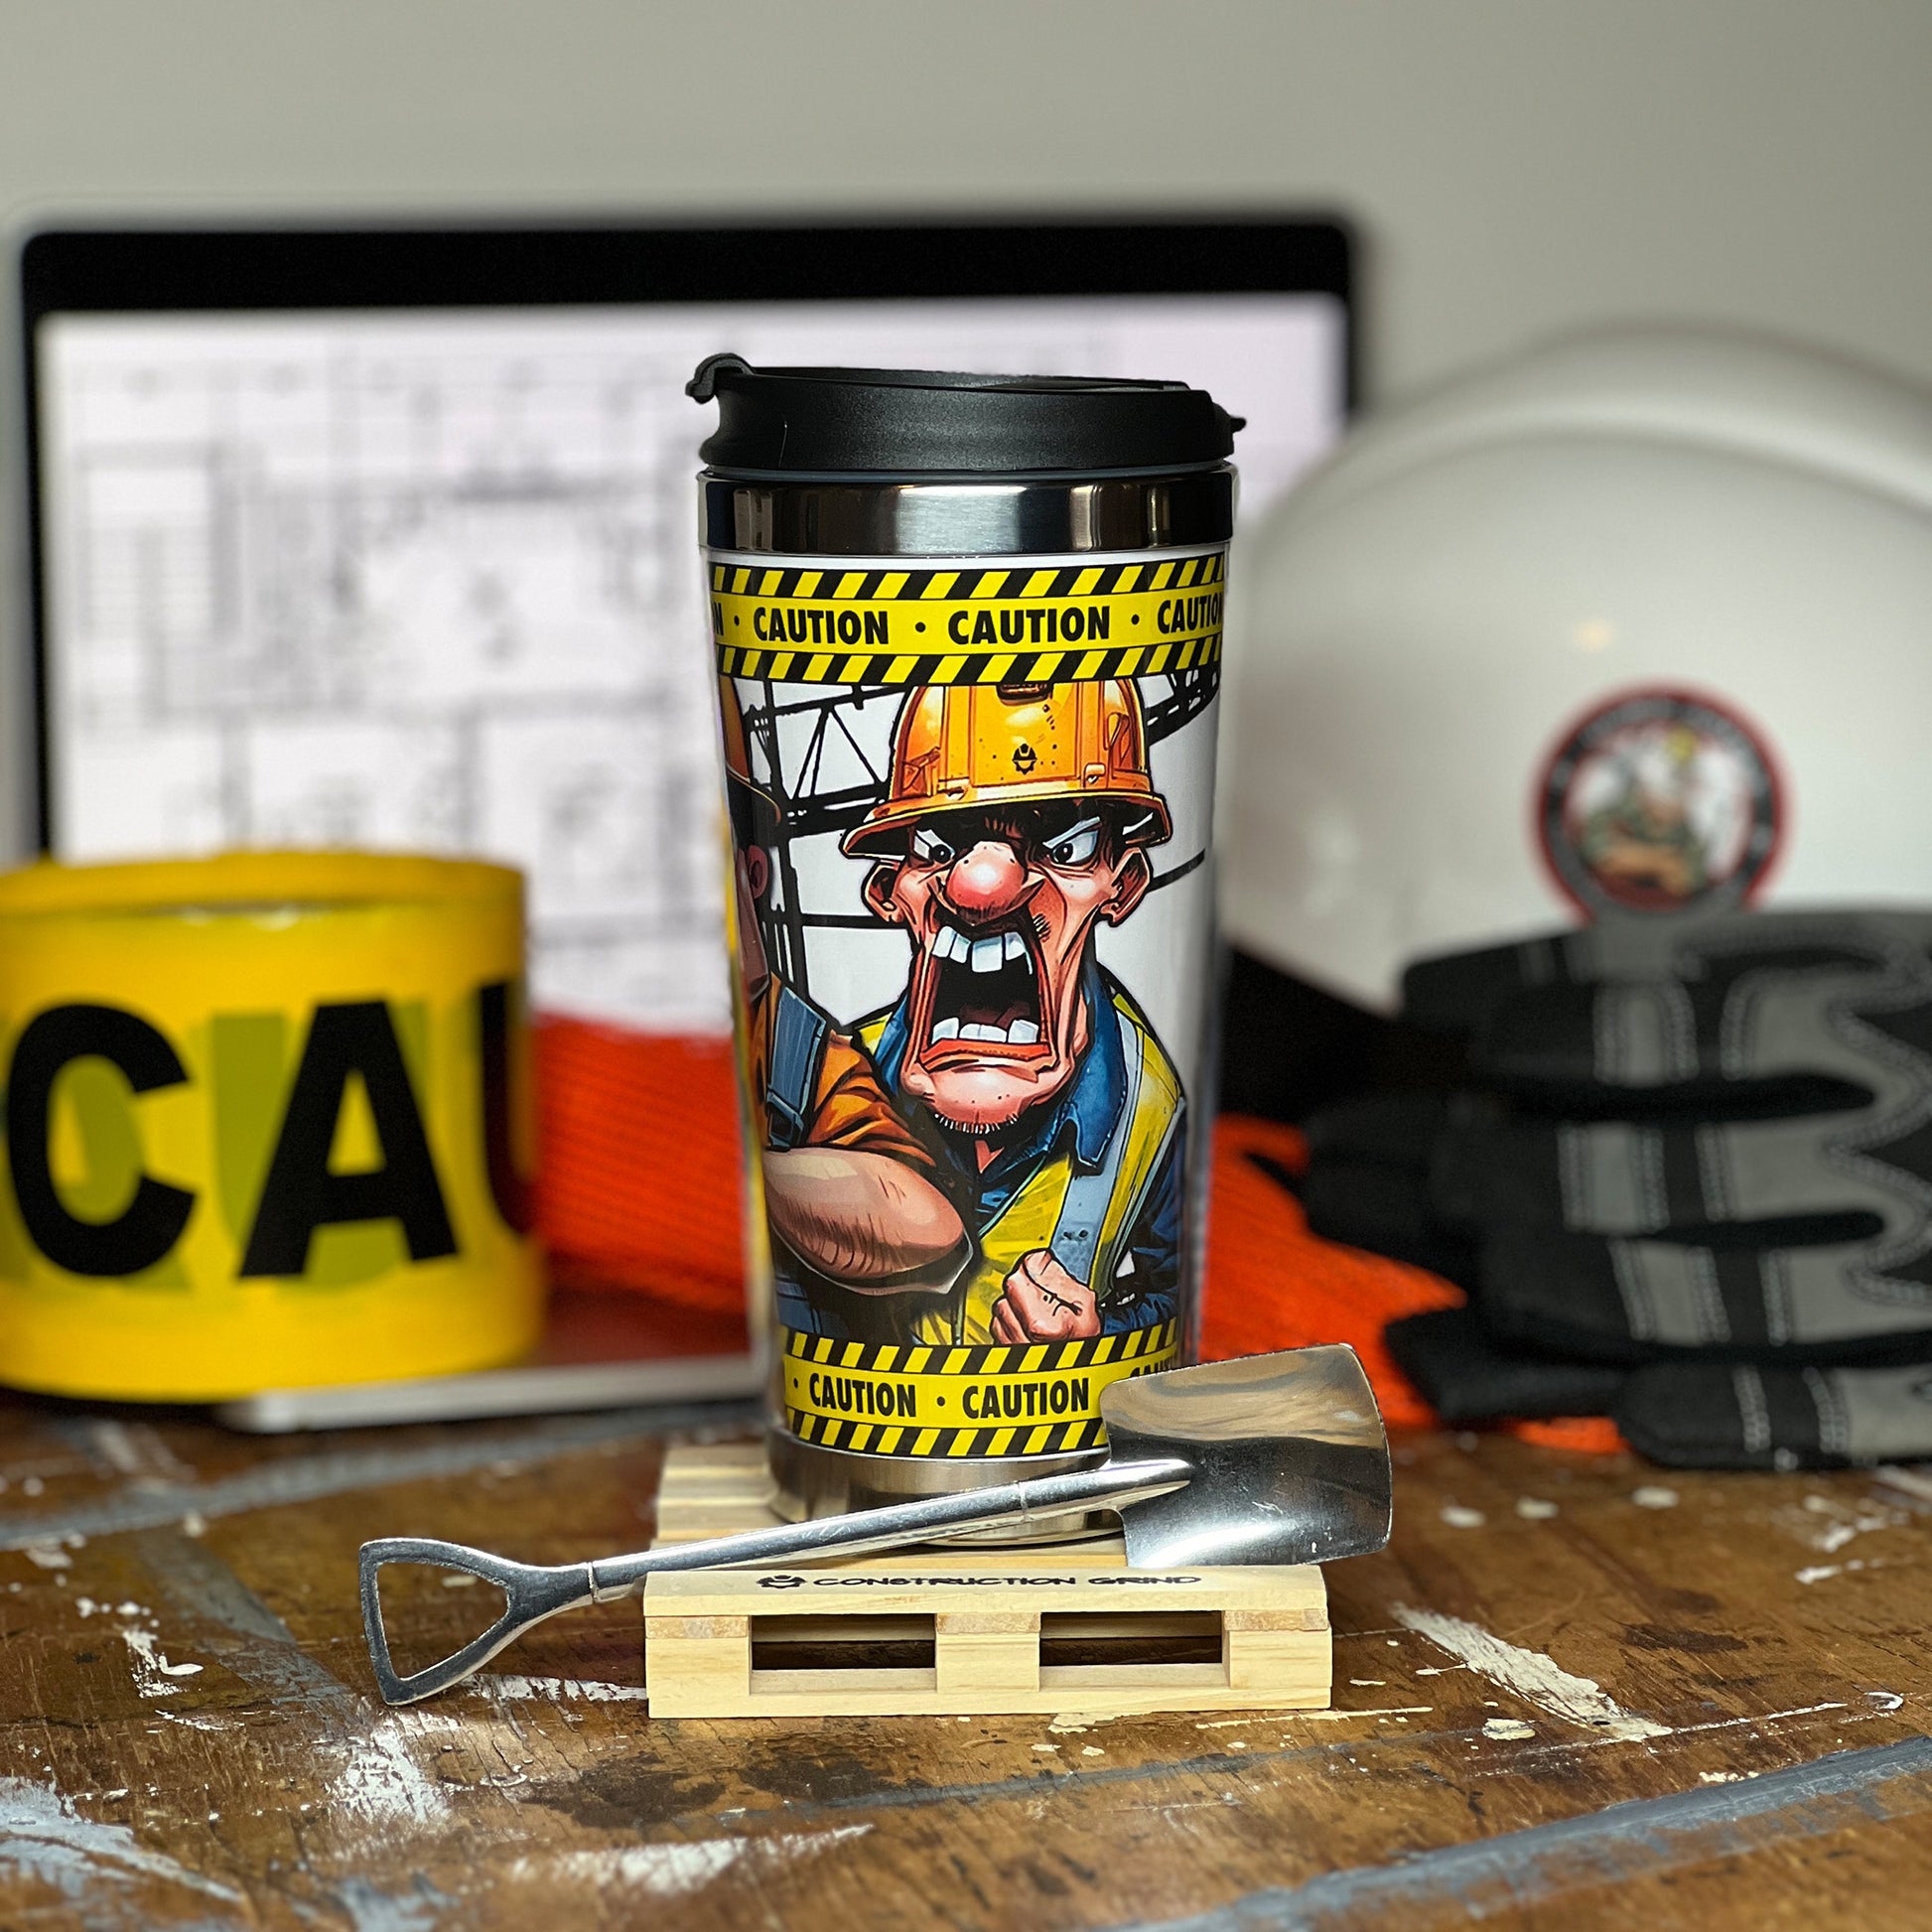 Construction Grind's "Meet the Crew" Second Shift 12 oz. coffee tumbler sitting on a 4" wooden pallet coaster with a stainless-steel shovel spoon. Showing our Safety Manager, "Danny", one of three crew members shown on the tumbler.